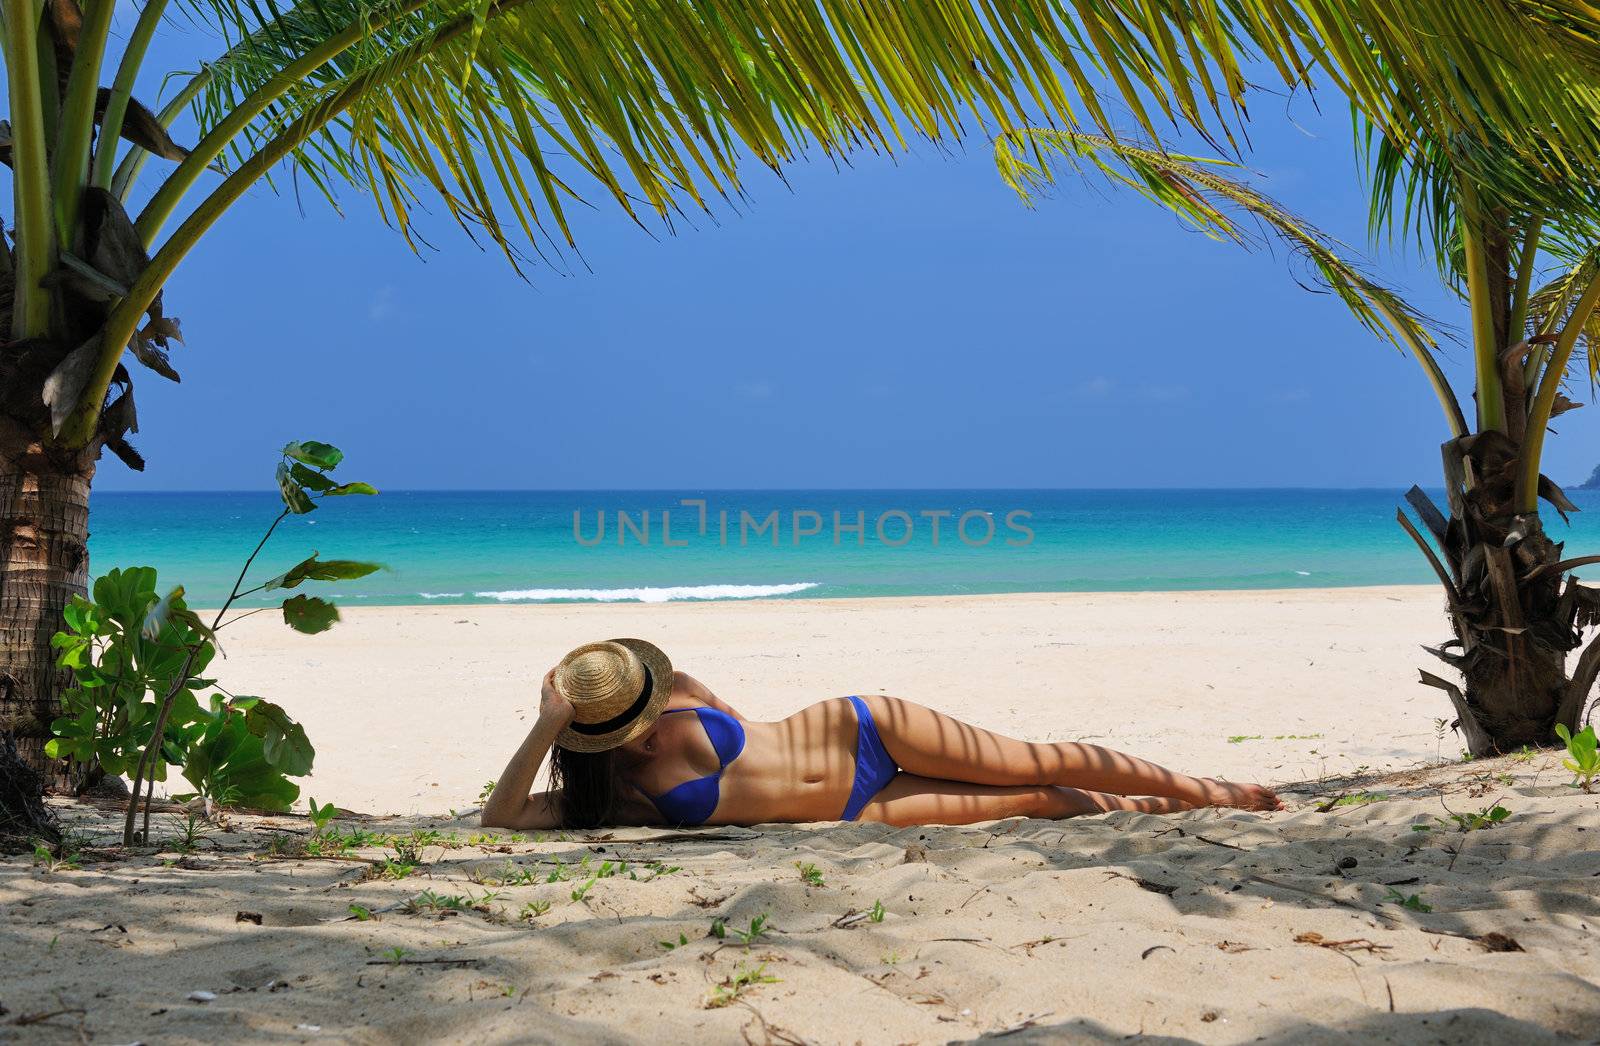 Woman at beach under palm tree by haveseen